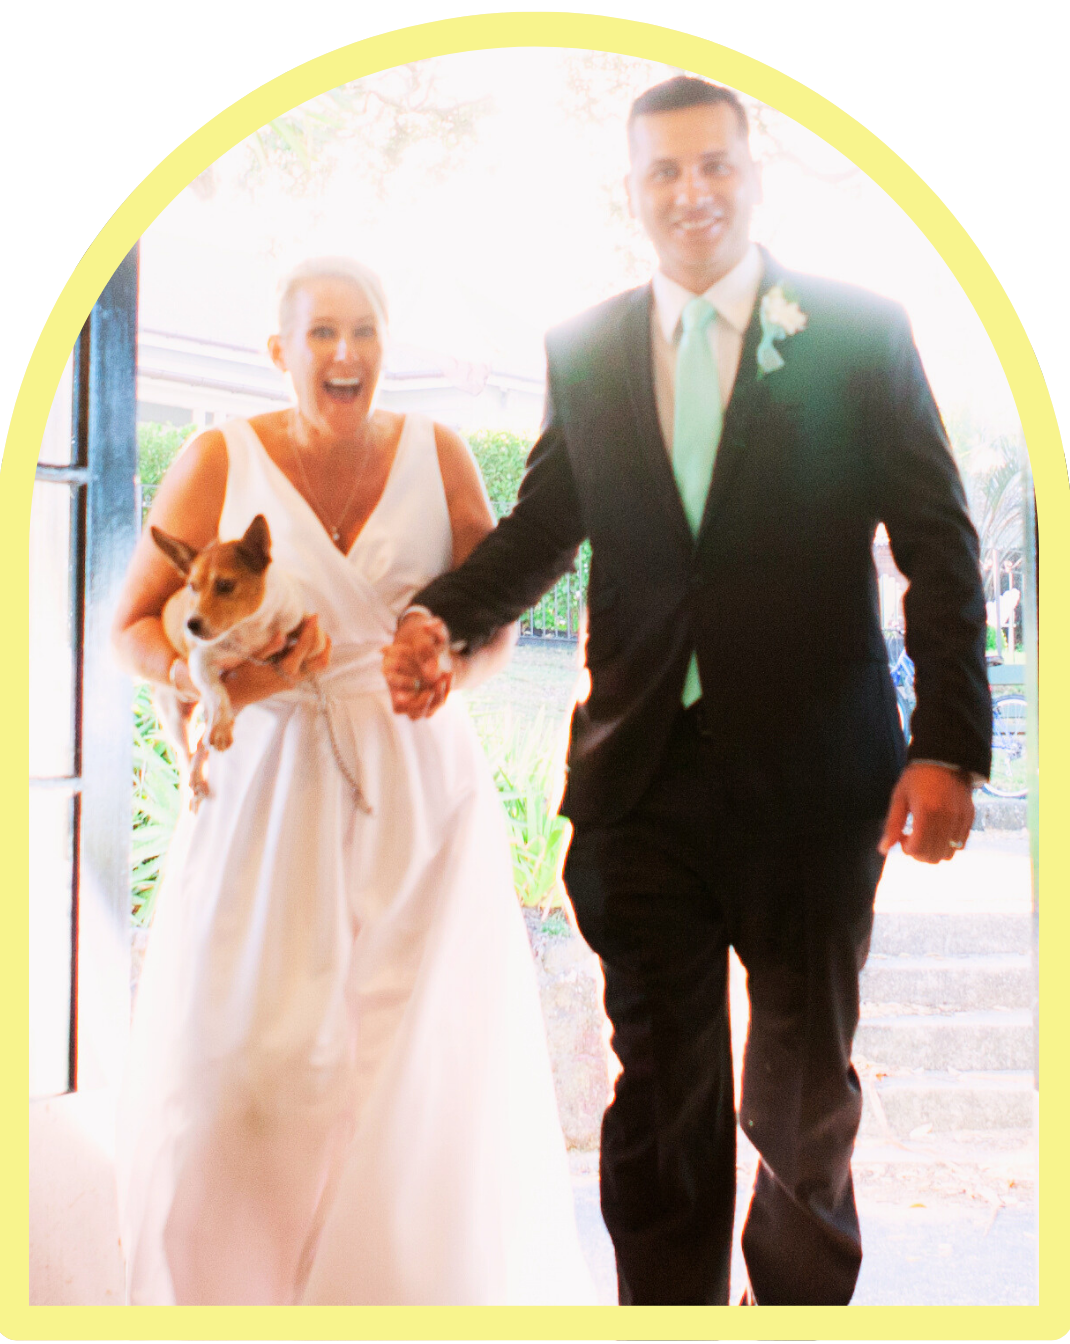 bride and groom with dog on wedding day, wedding celebrant auckland, lucky in love, kimberly sanders, marriage celebrant, celebrant, auckland celebrant